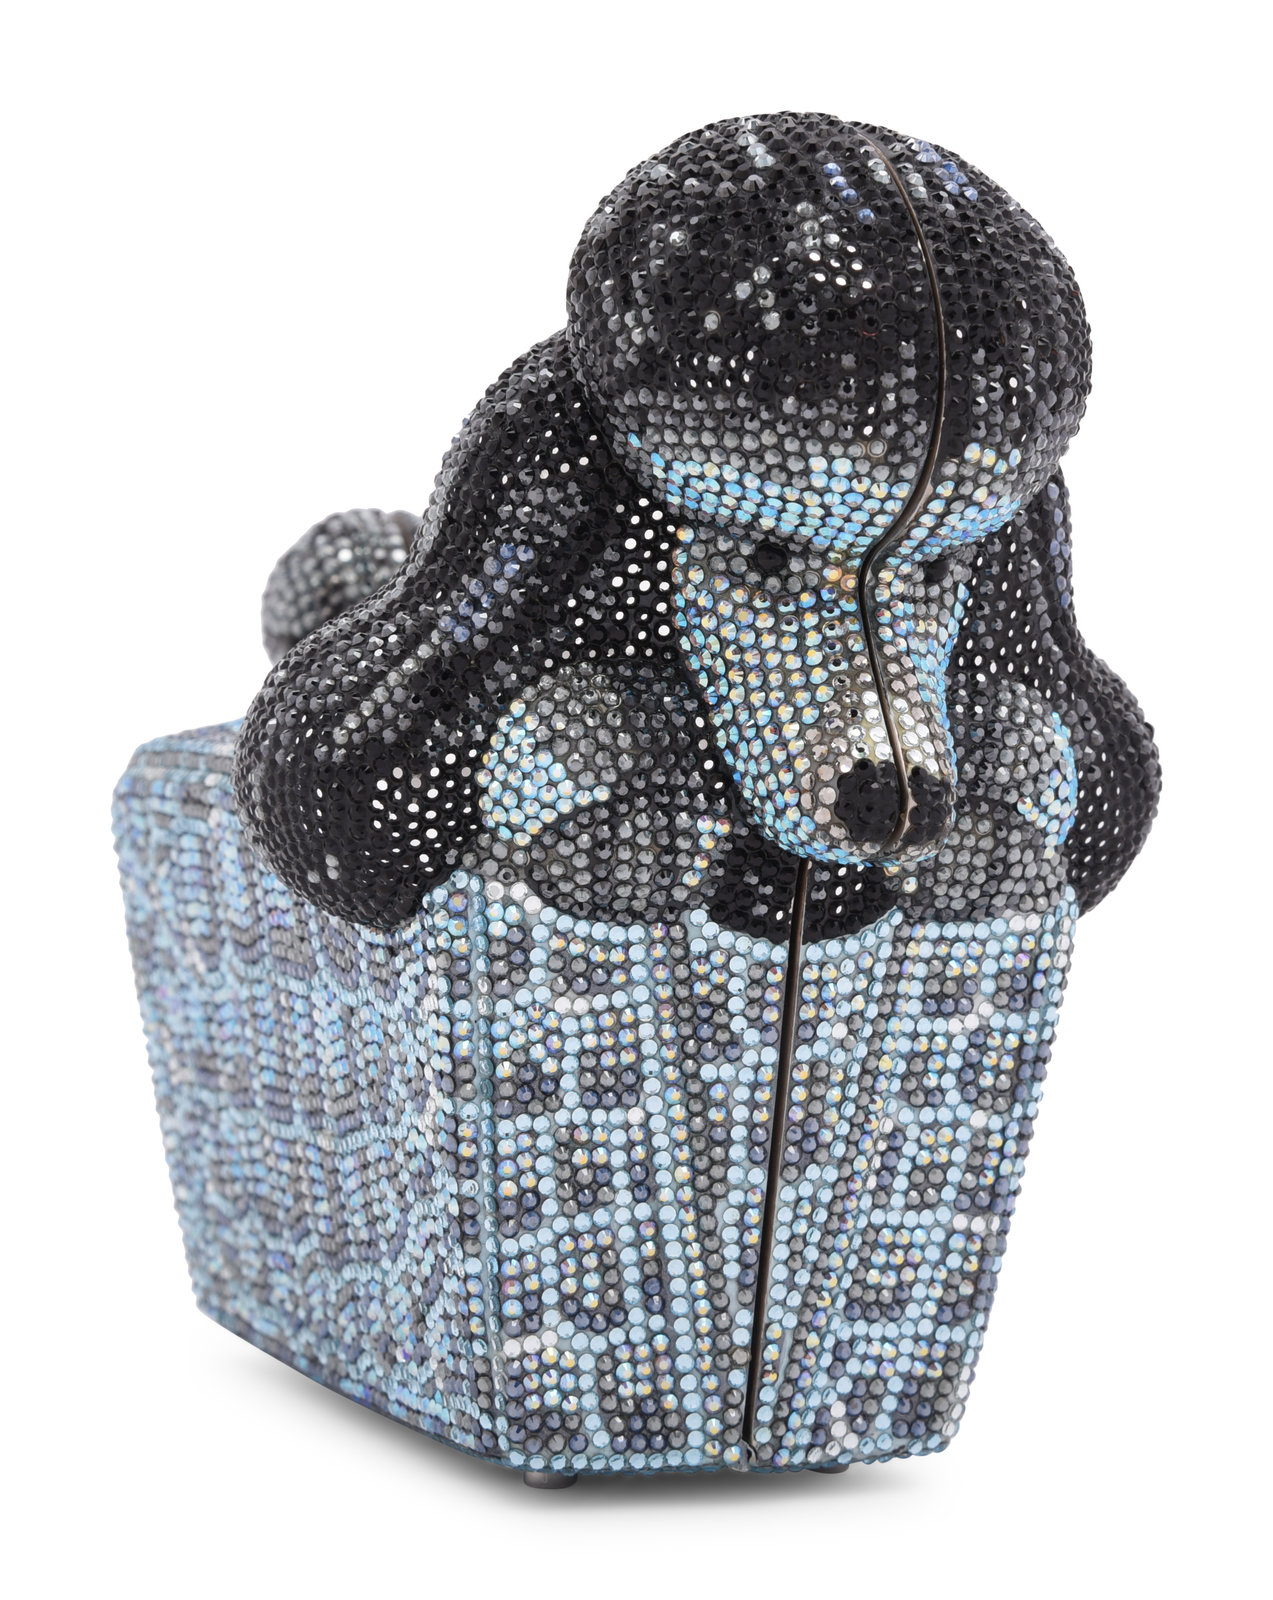 Lot - JUDITH LEIBER BLACK FRENCH POODLE MINAUDIERE